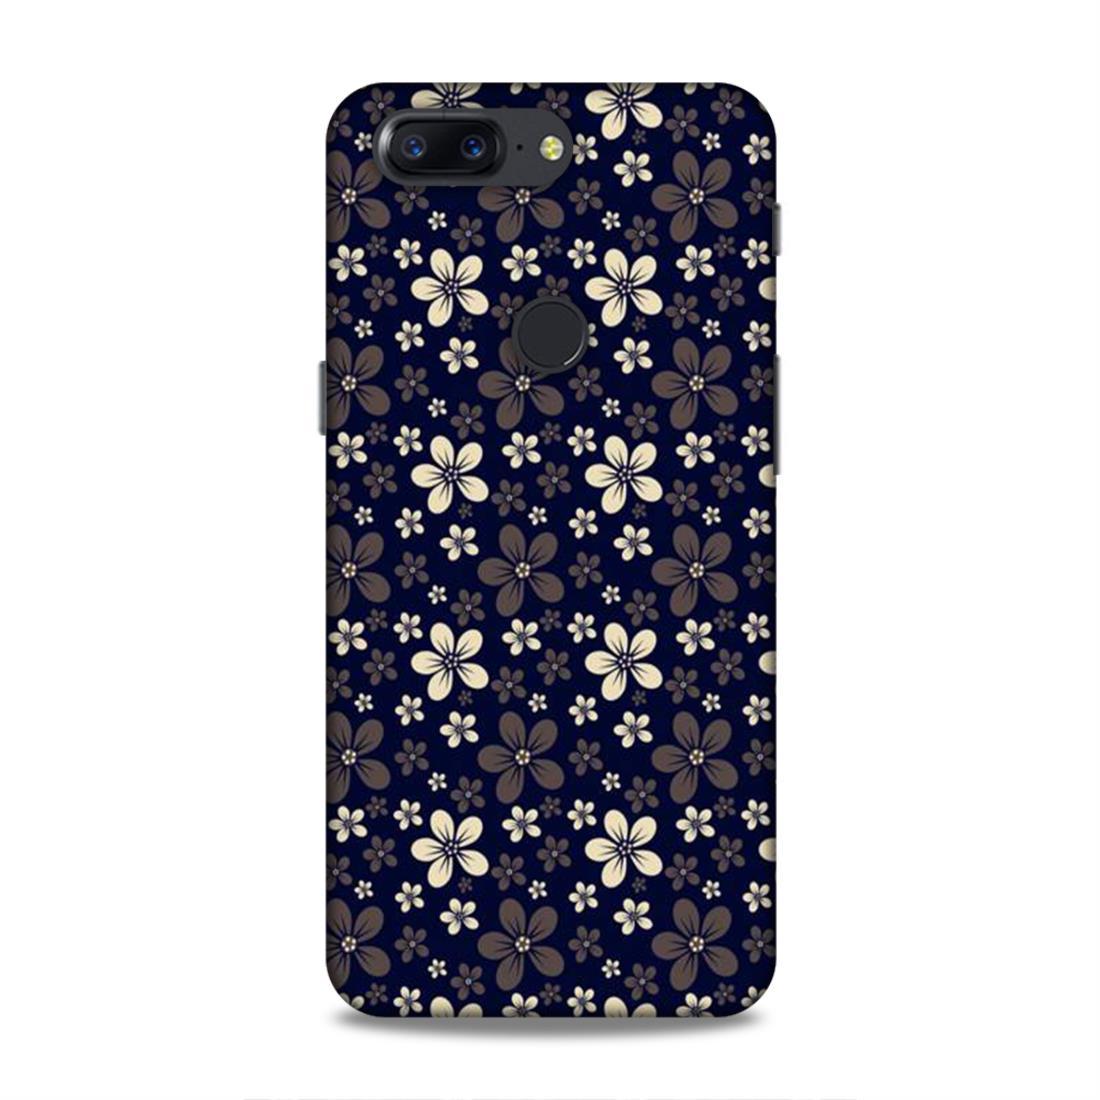 Small Flower Art OnePlus 5T Phone Back Cover